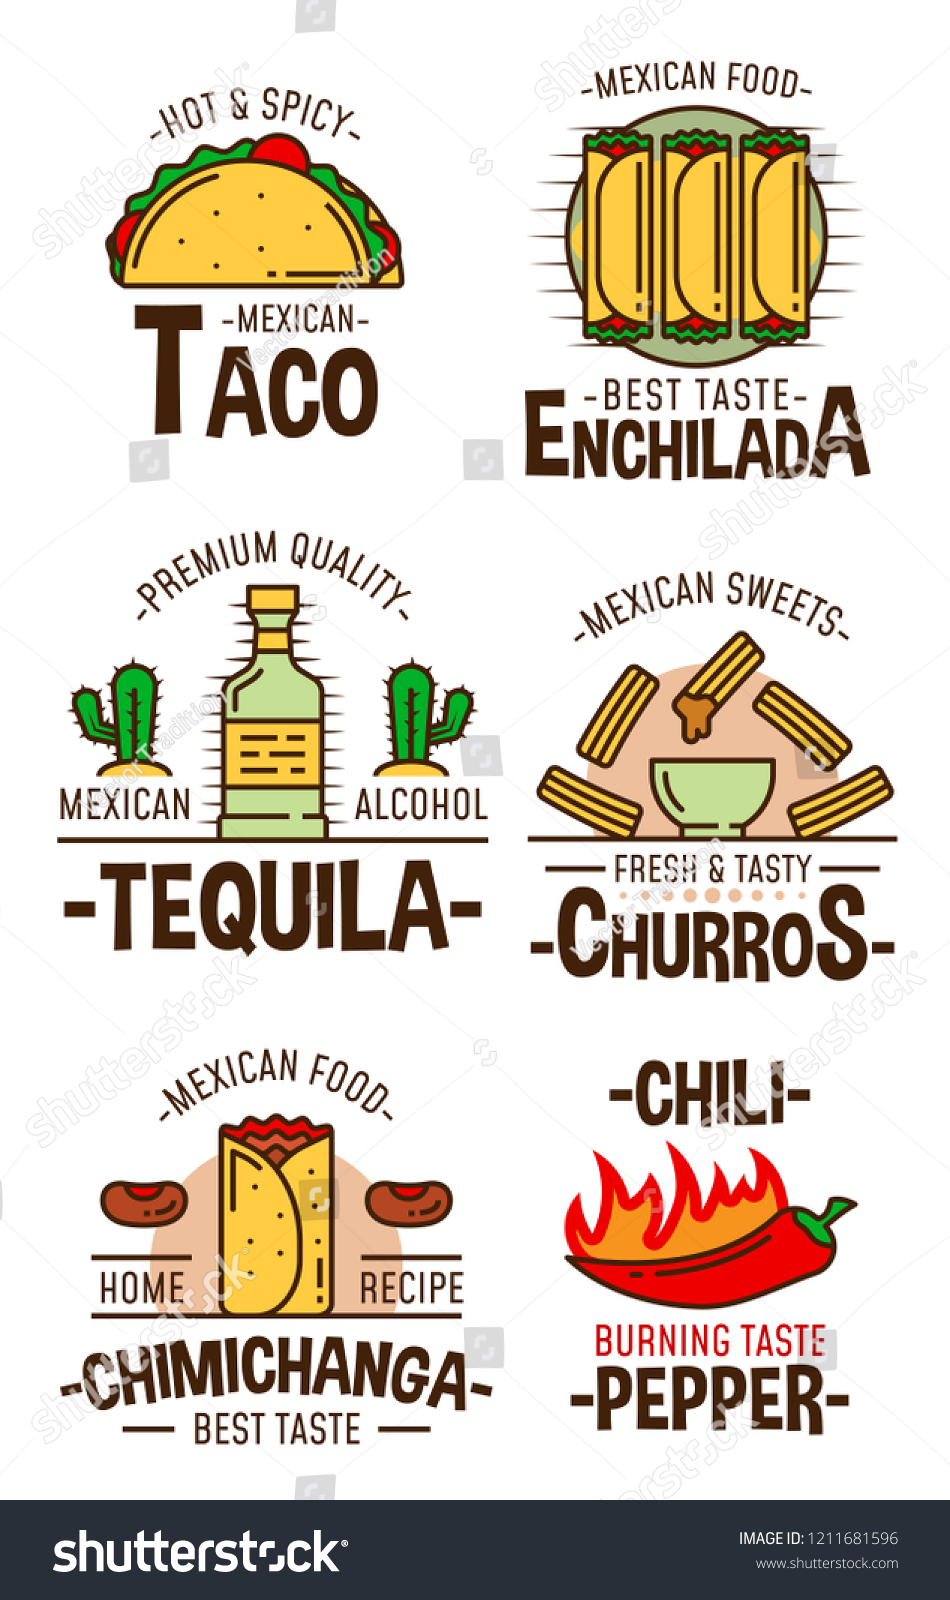 SVG of Mexican food and drink icons. Fast food tacos, enchilada and fried burrito chimichanga, chili pepper, sweet cookie churros and tequila alcohol bottle. Fastfood restaurant and cafe symbols svg